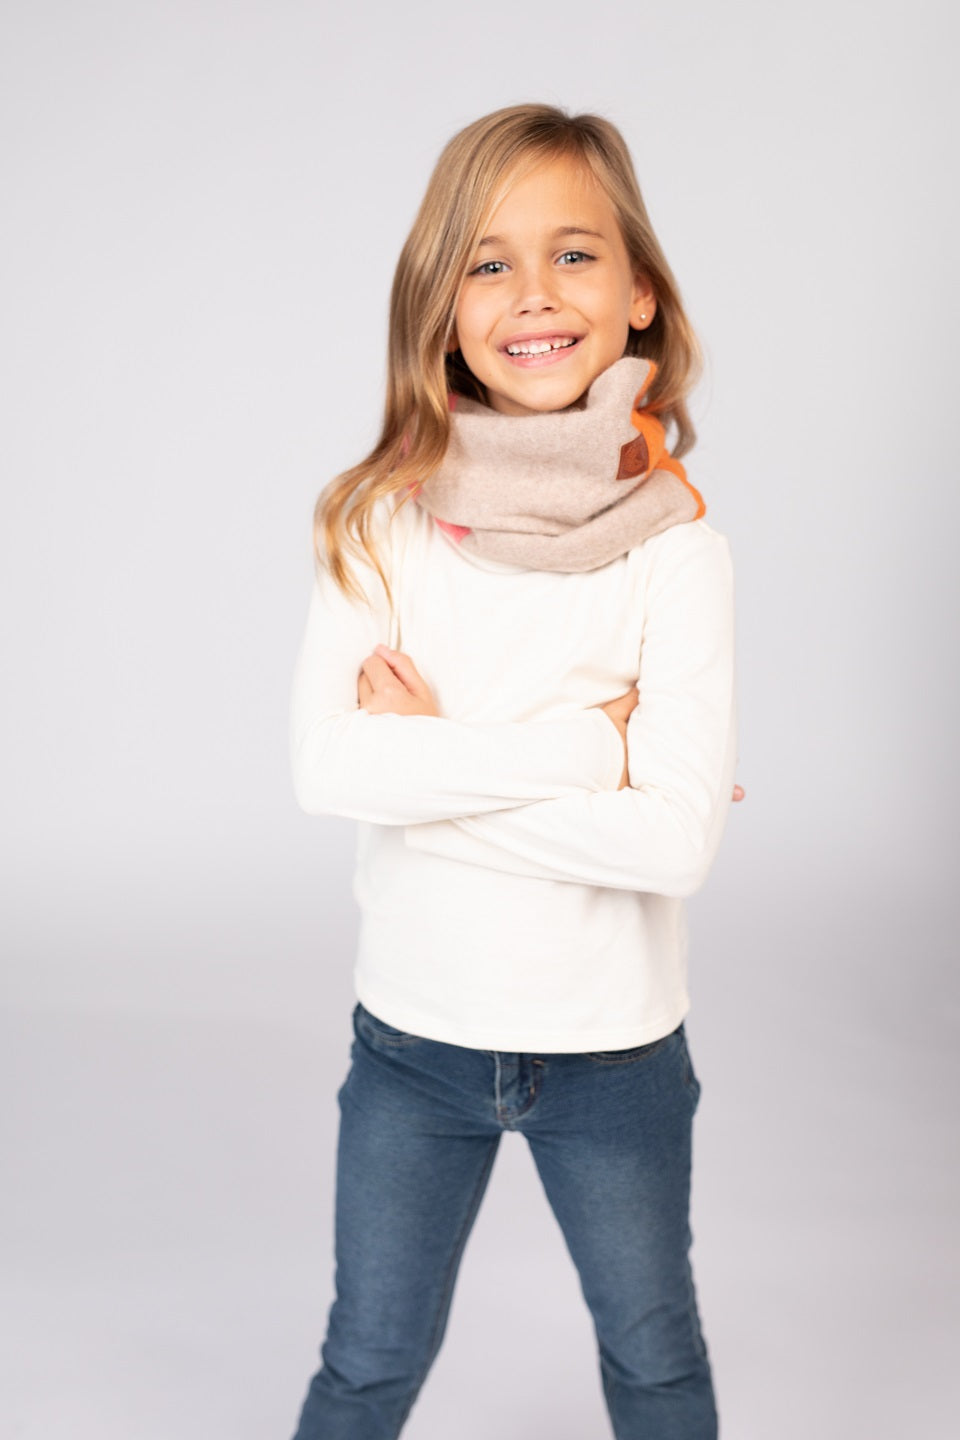 Orange and Pink - Cashmere Infinity Scarf for Kids